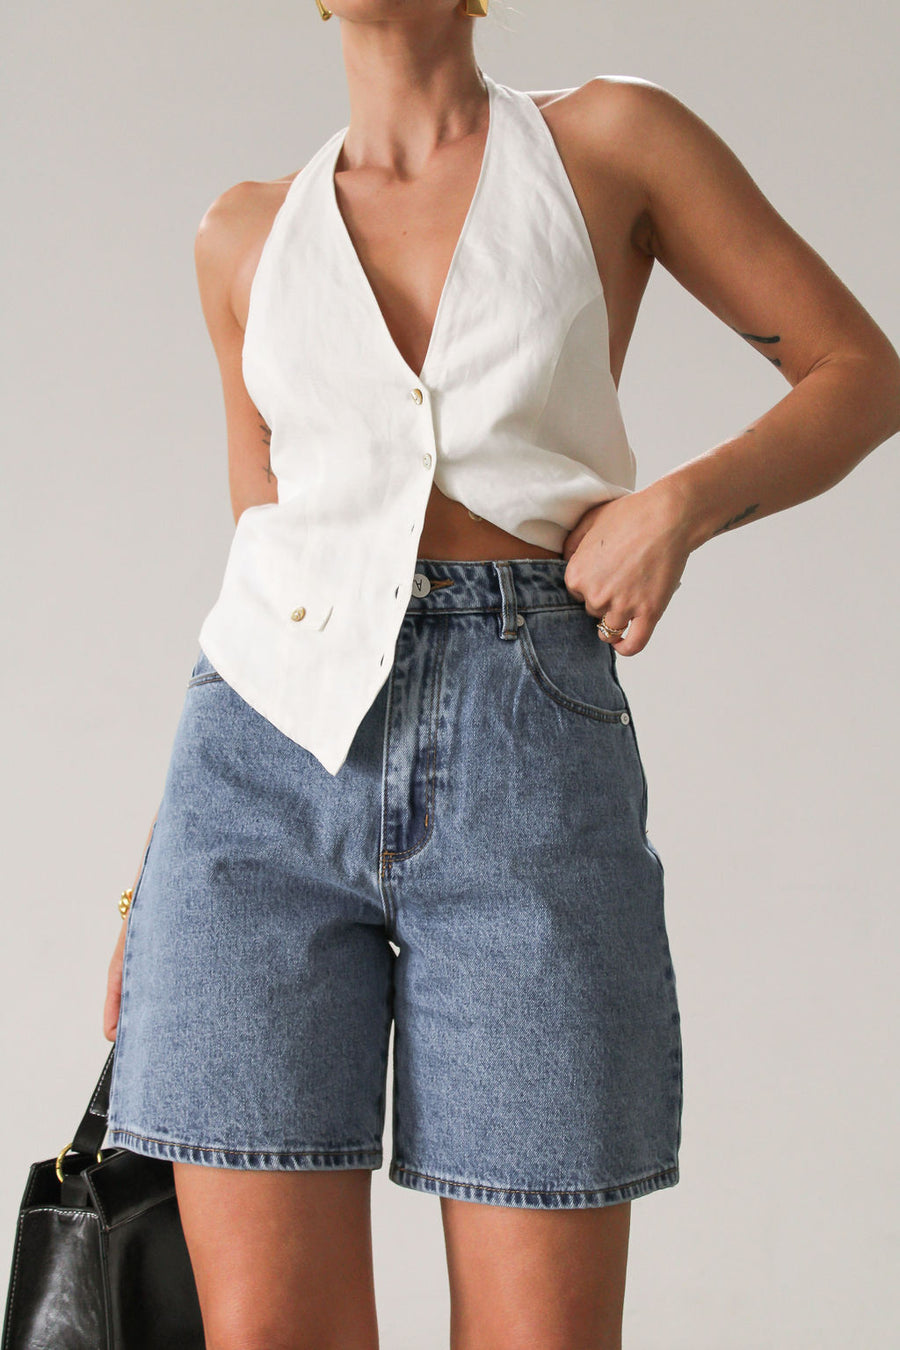 Denim shorts. Button and zipper fly closure. Five pockets. Unlined. High waisted, relaxed, wide leg, mid thigh length, non-stretch rigid denim.